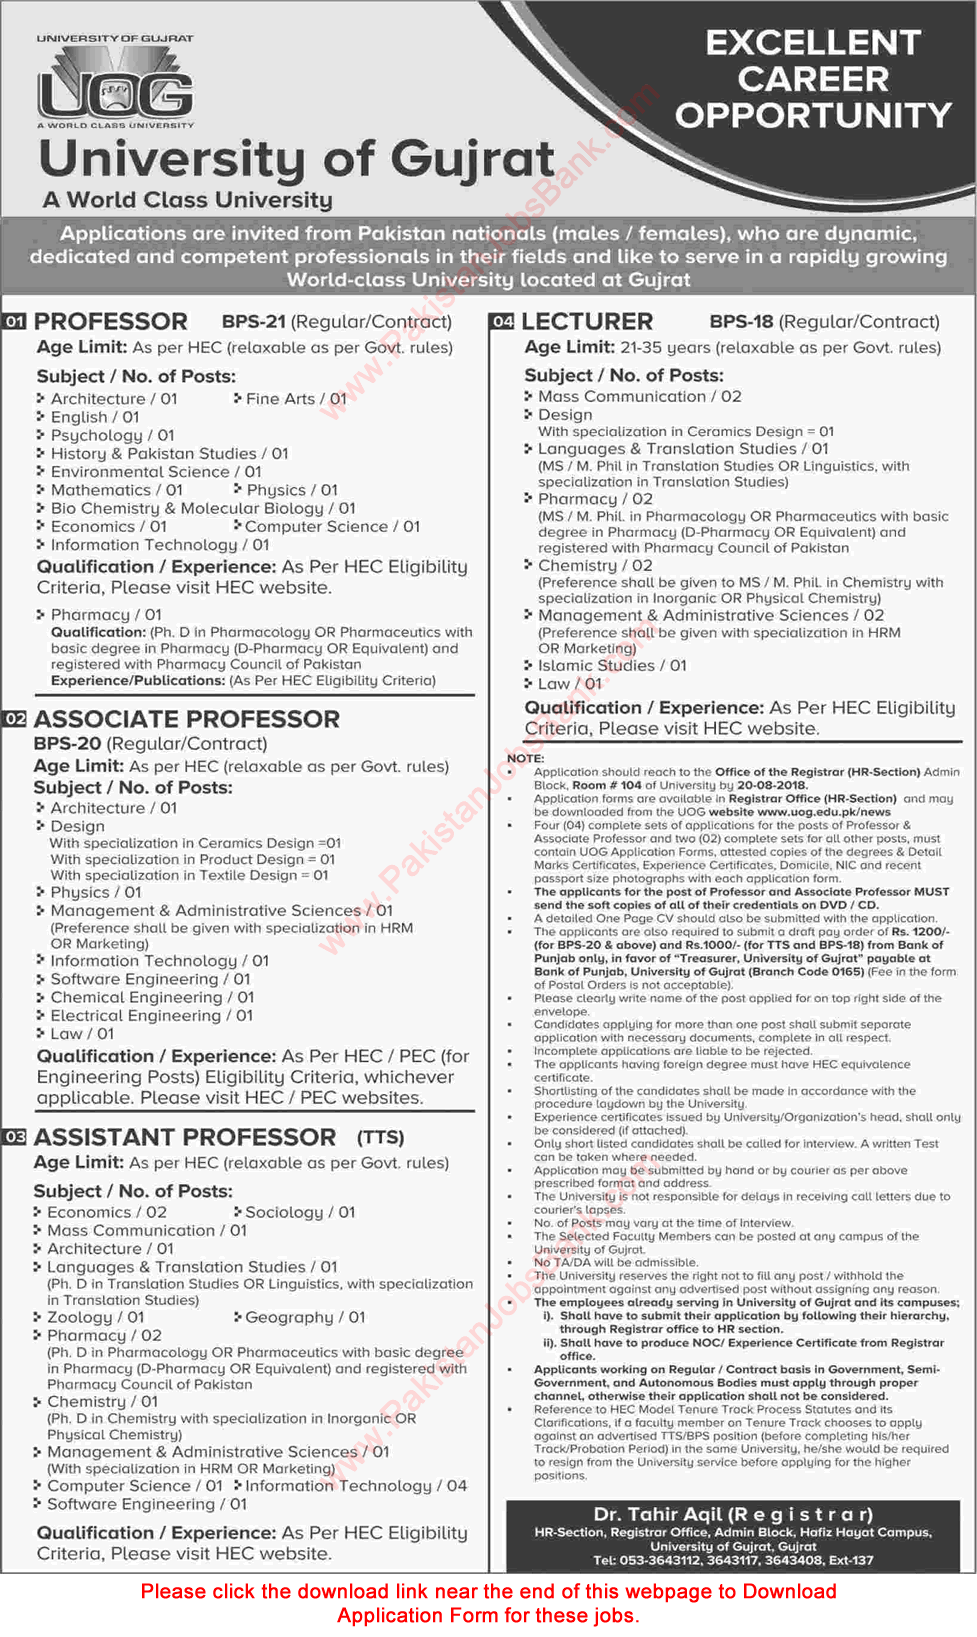 University of Gujrat Jobs August 2018 UOG Application Form Teaching Faculty Latest